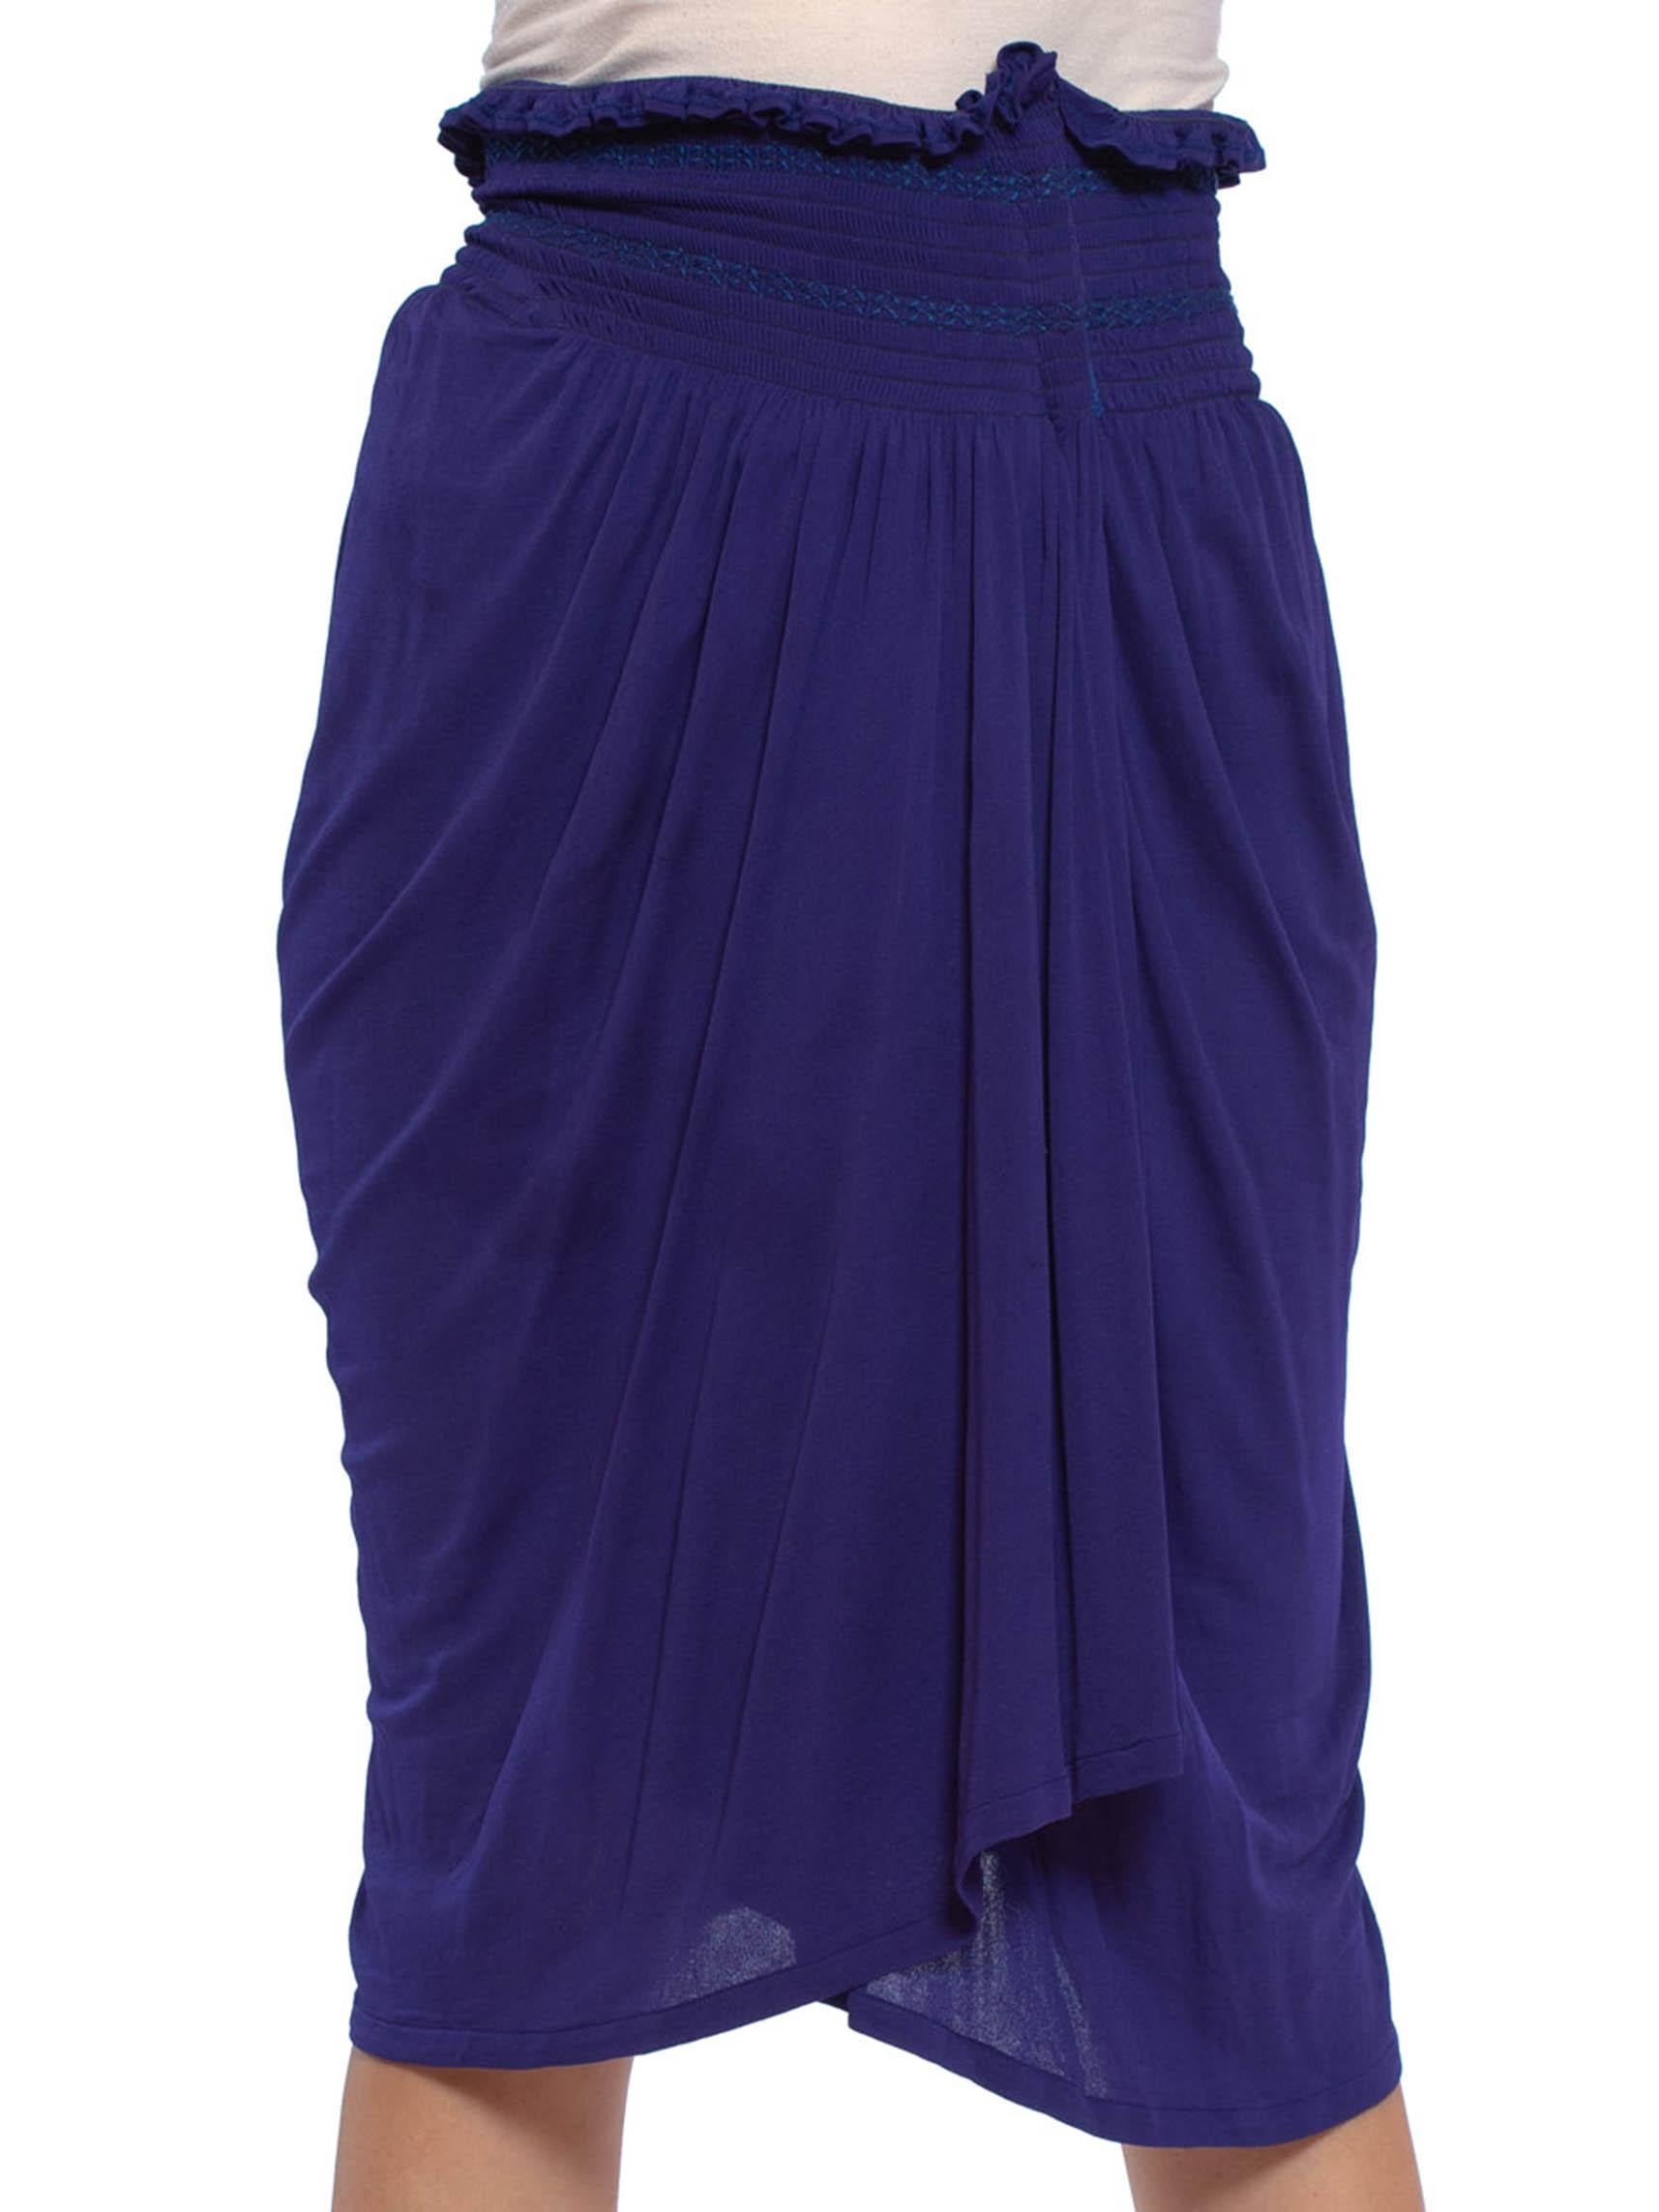 1990S KENZO Purple Blue Viscose Jersey Wrap Skirt With Smocked Waist For Sale 3